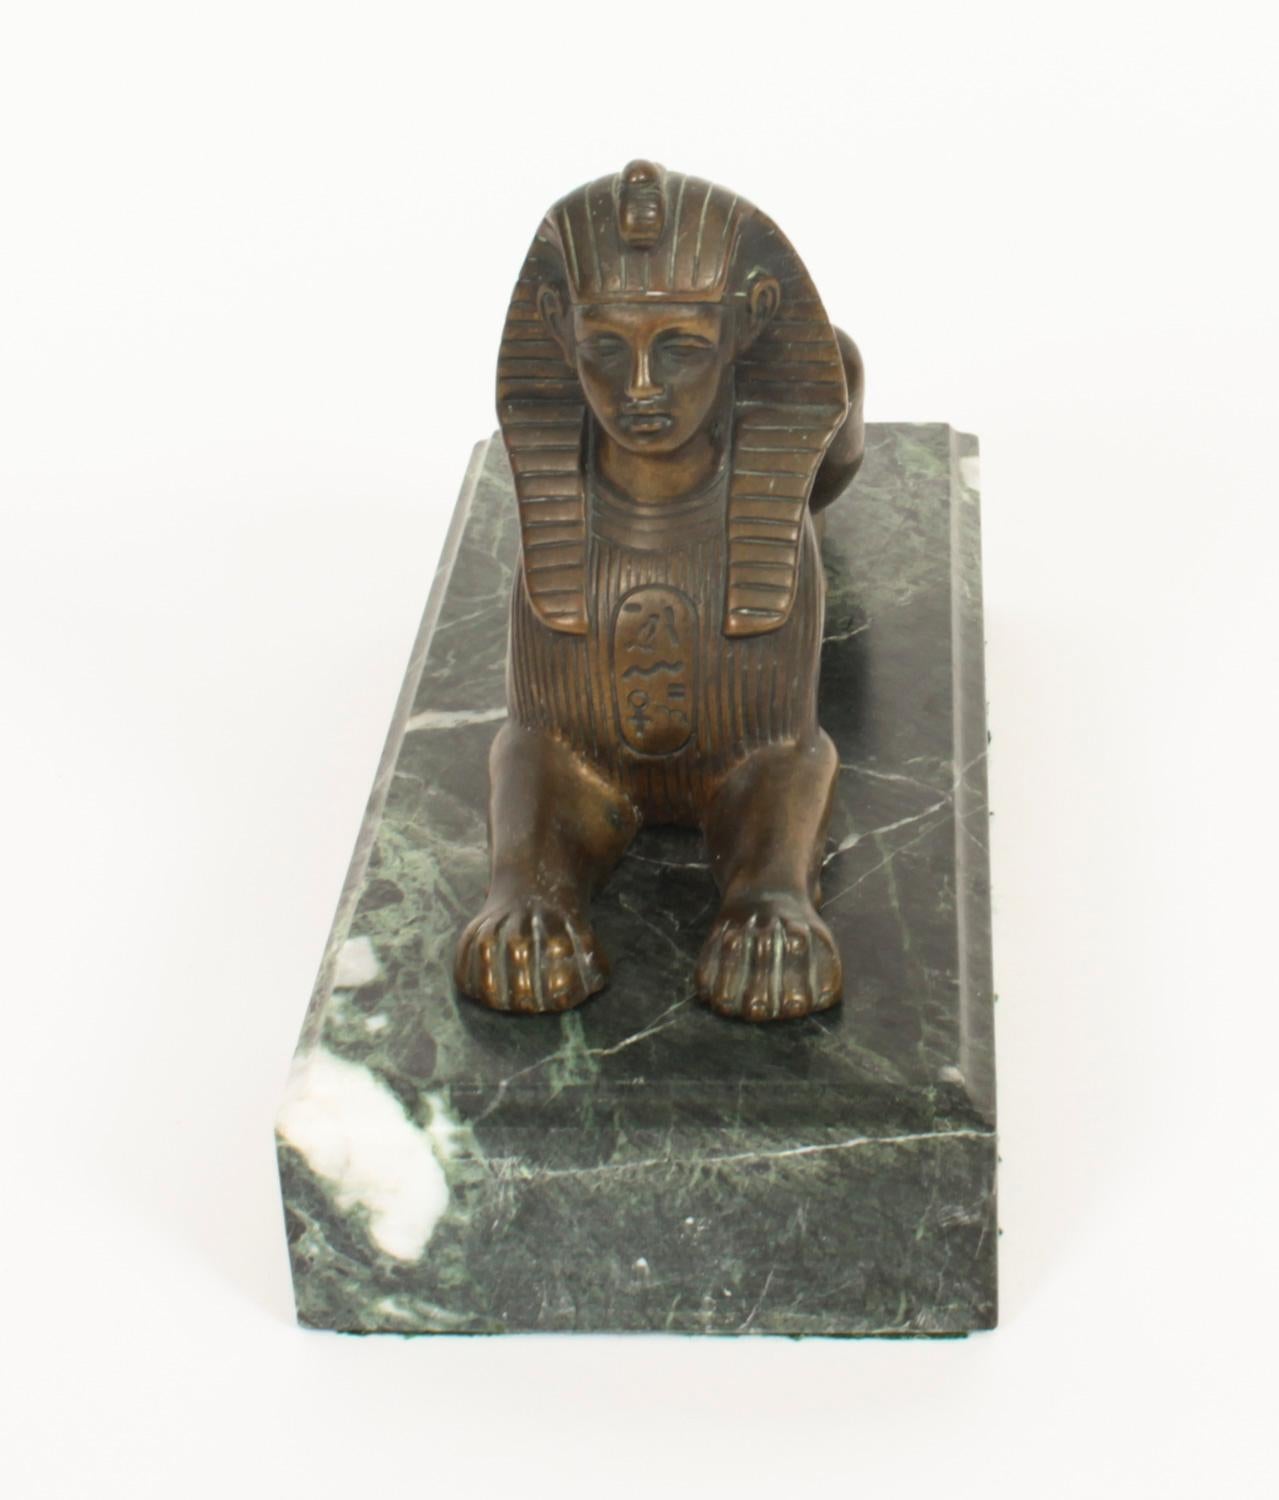 This is a fine antique 19th centurybronze Egyptian Revival figure of a recumbent sphinx raised on a decorative verde antico marble rectangular plinth.
 
It is a fine piece which will look beautiful wherever placed.
 
Condition:
In excellent